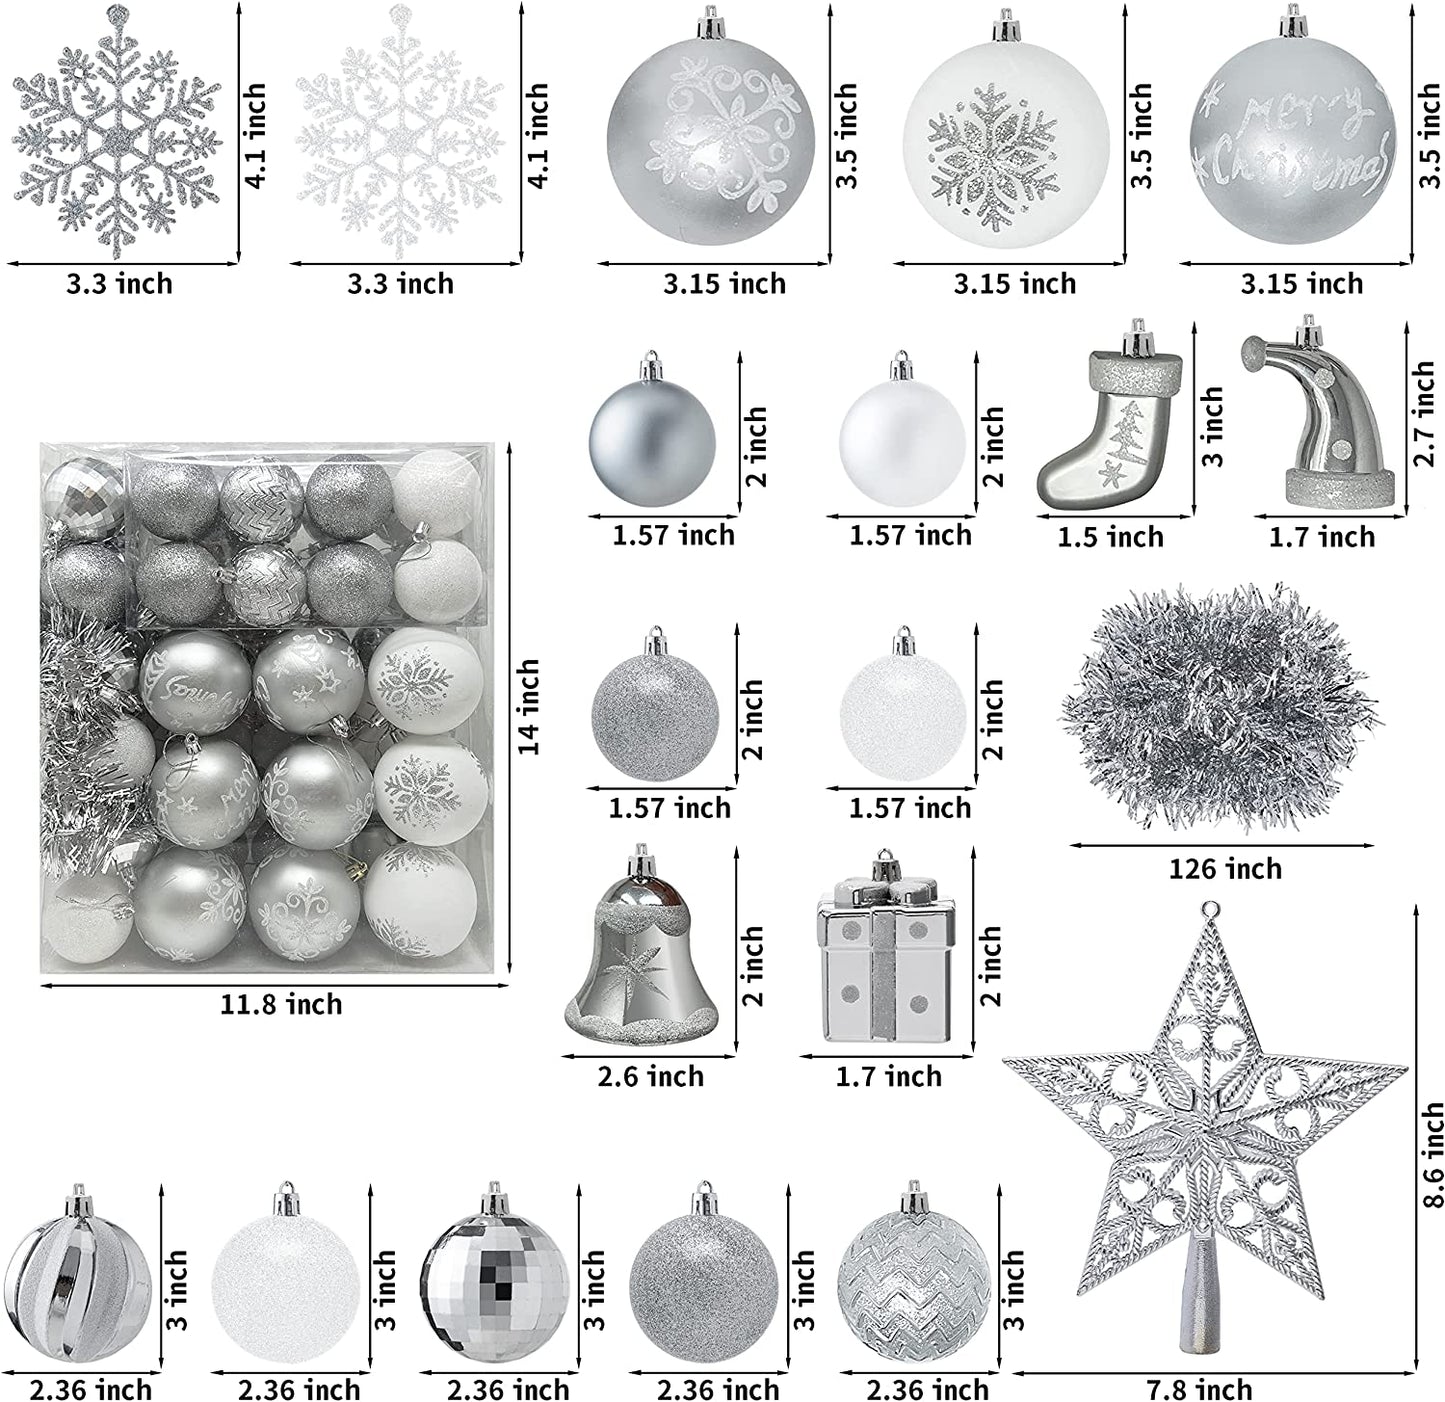 112 Pcs Silver & White Christmas Assorted Ornaments with a Star Tree Topper